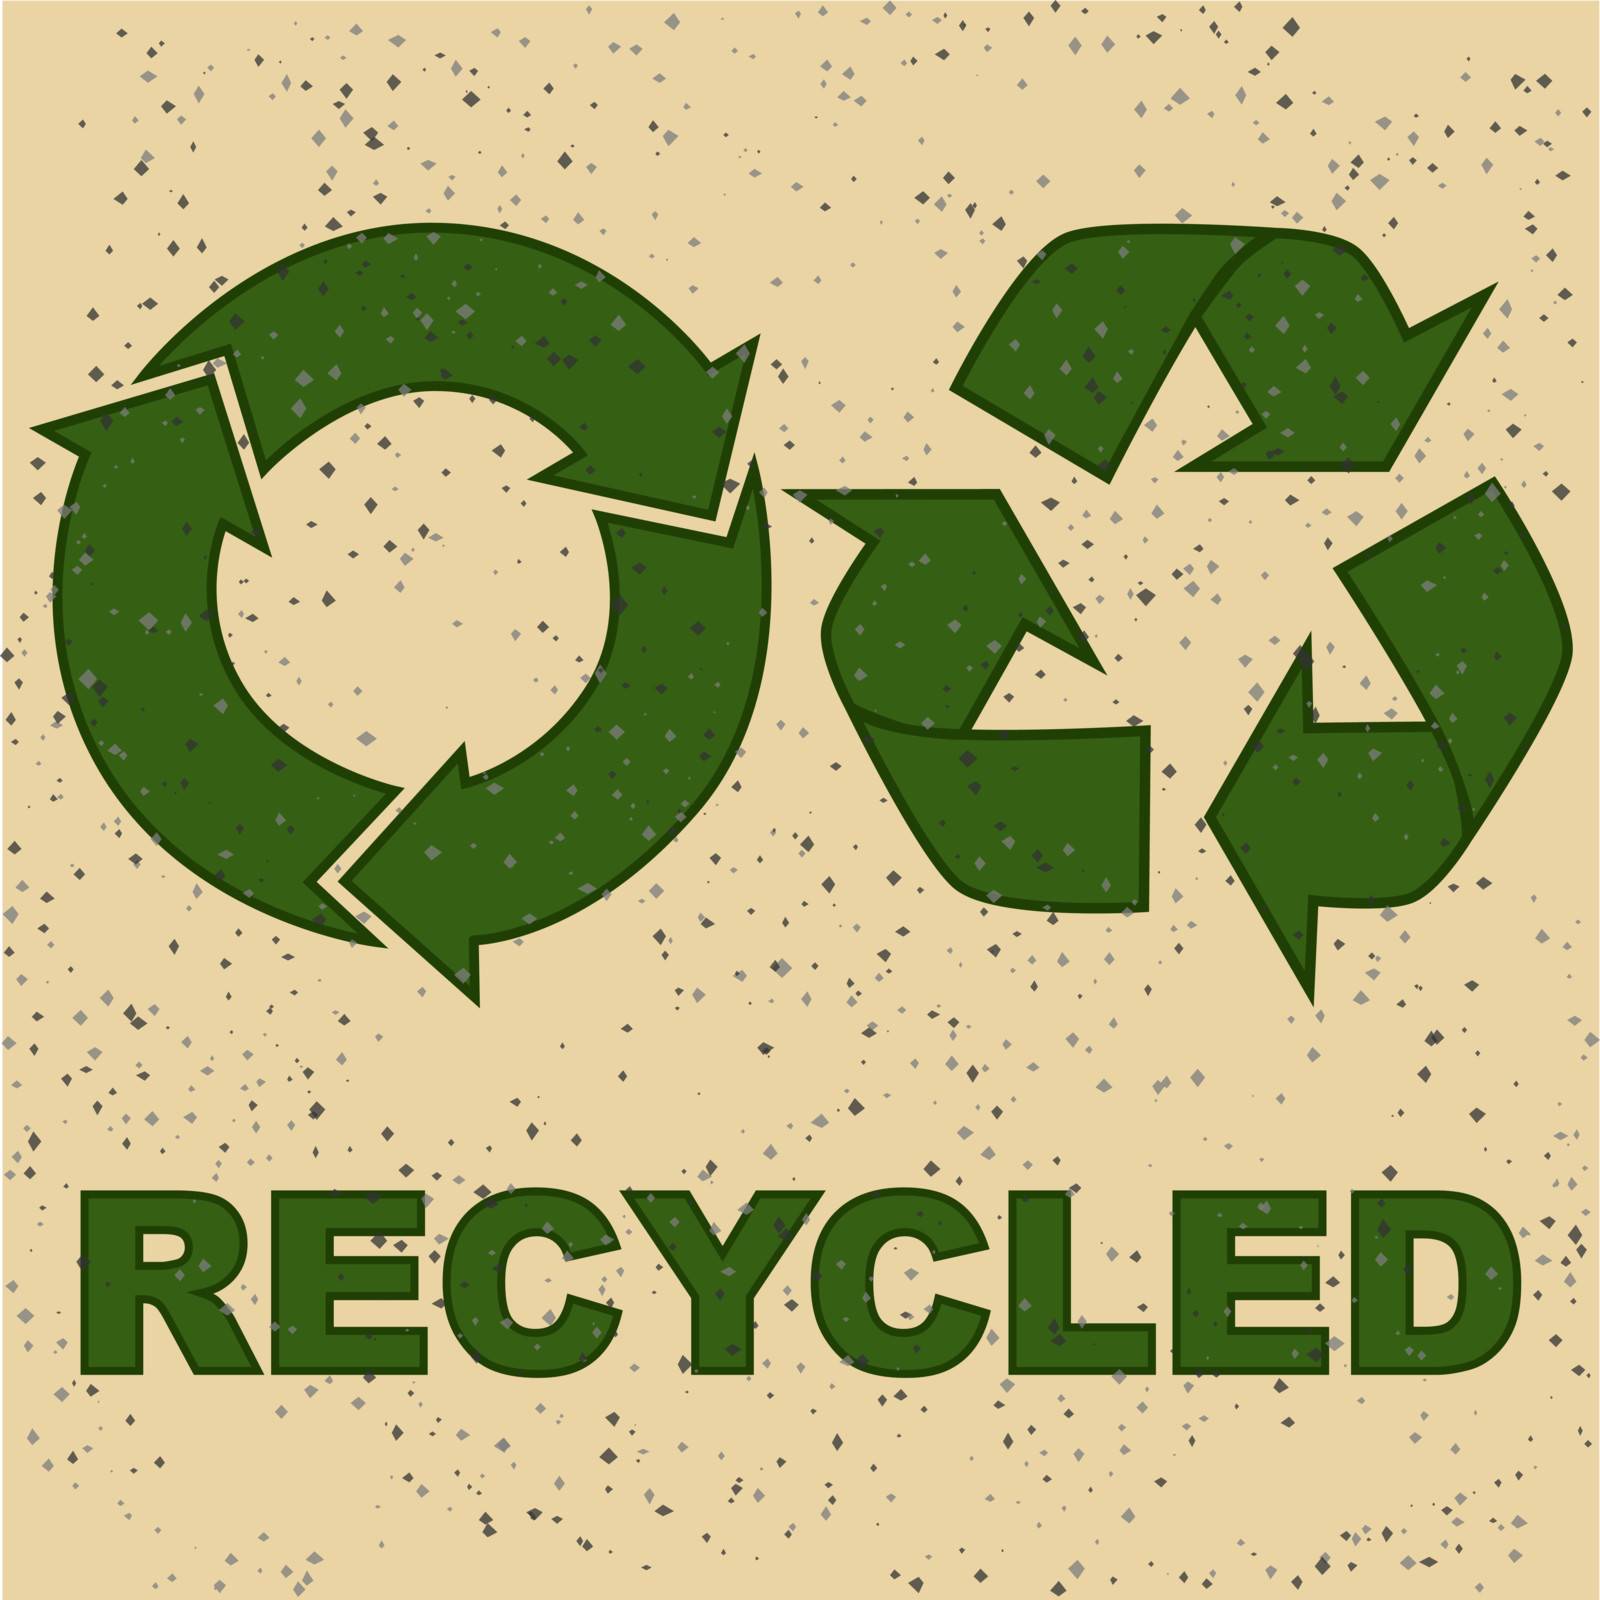 Concept illustration showing two recycling signs on a recycled paper texture